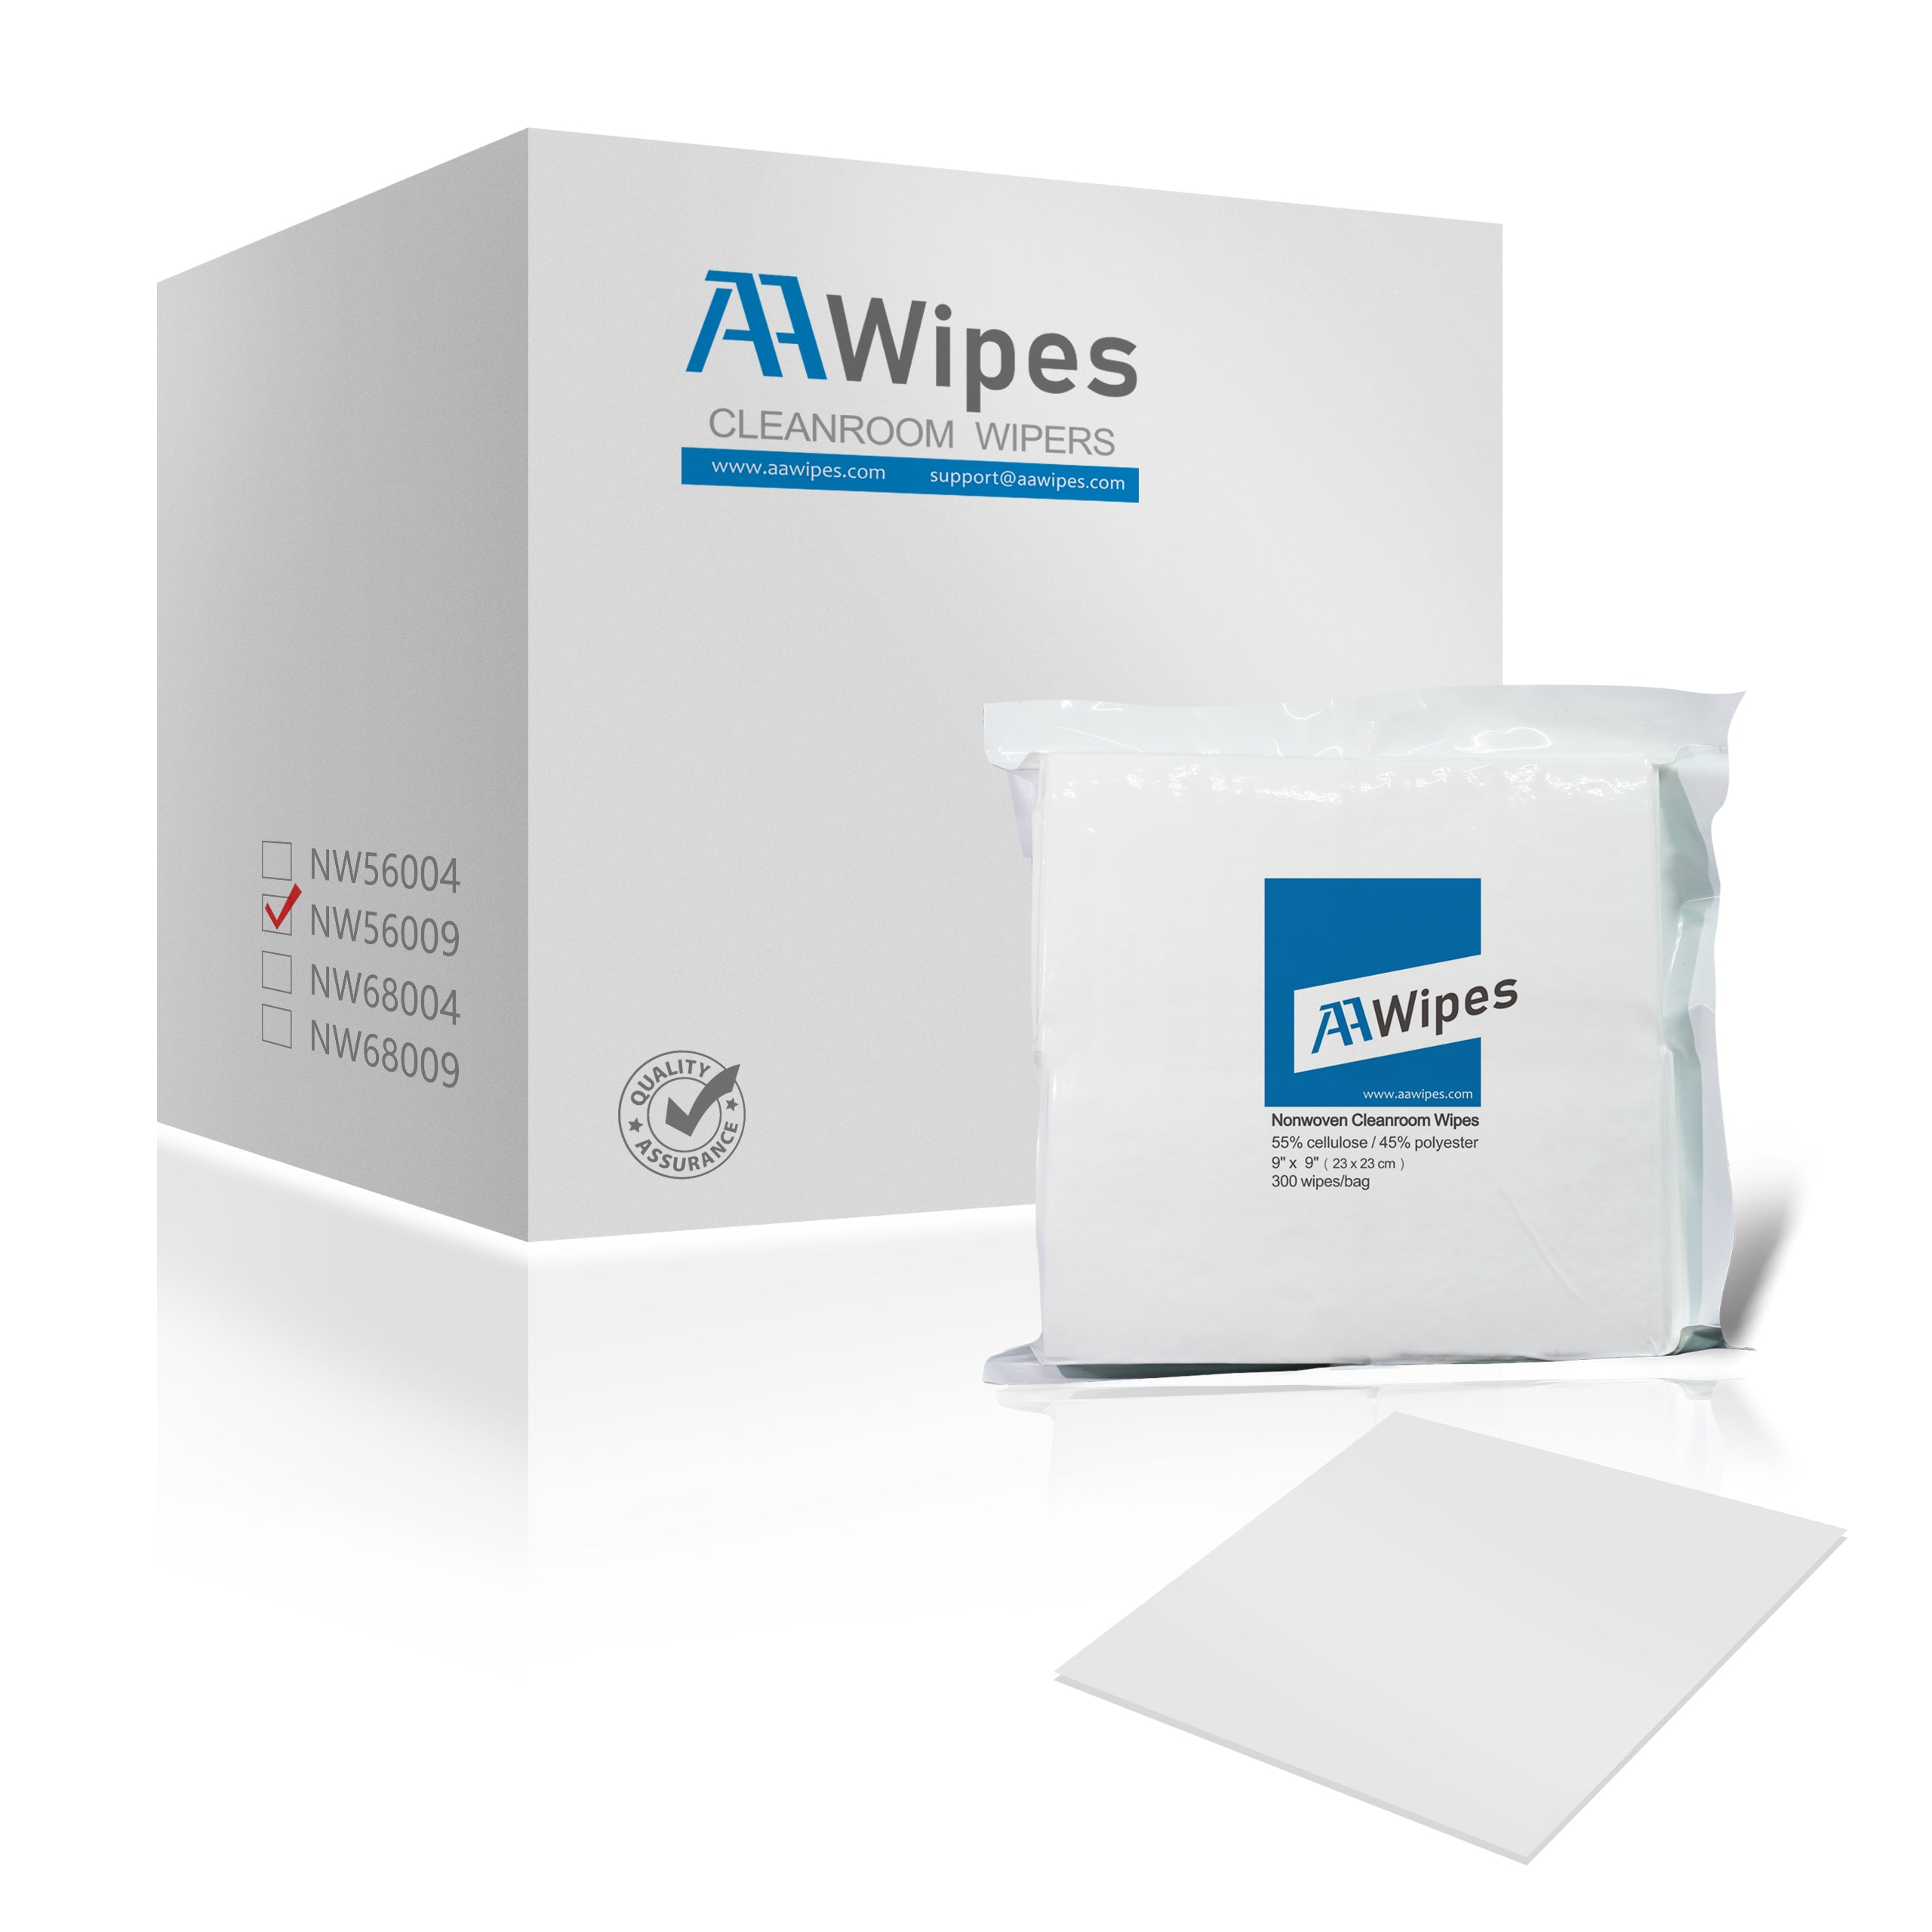 AAwipes nonwoven wipes High absorbency for oils and solvents, excellent wet and dry strength, abrasion and chemical resistance, cost-effective.